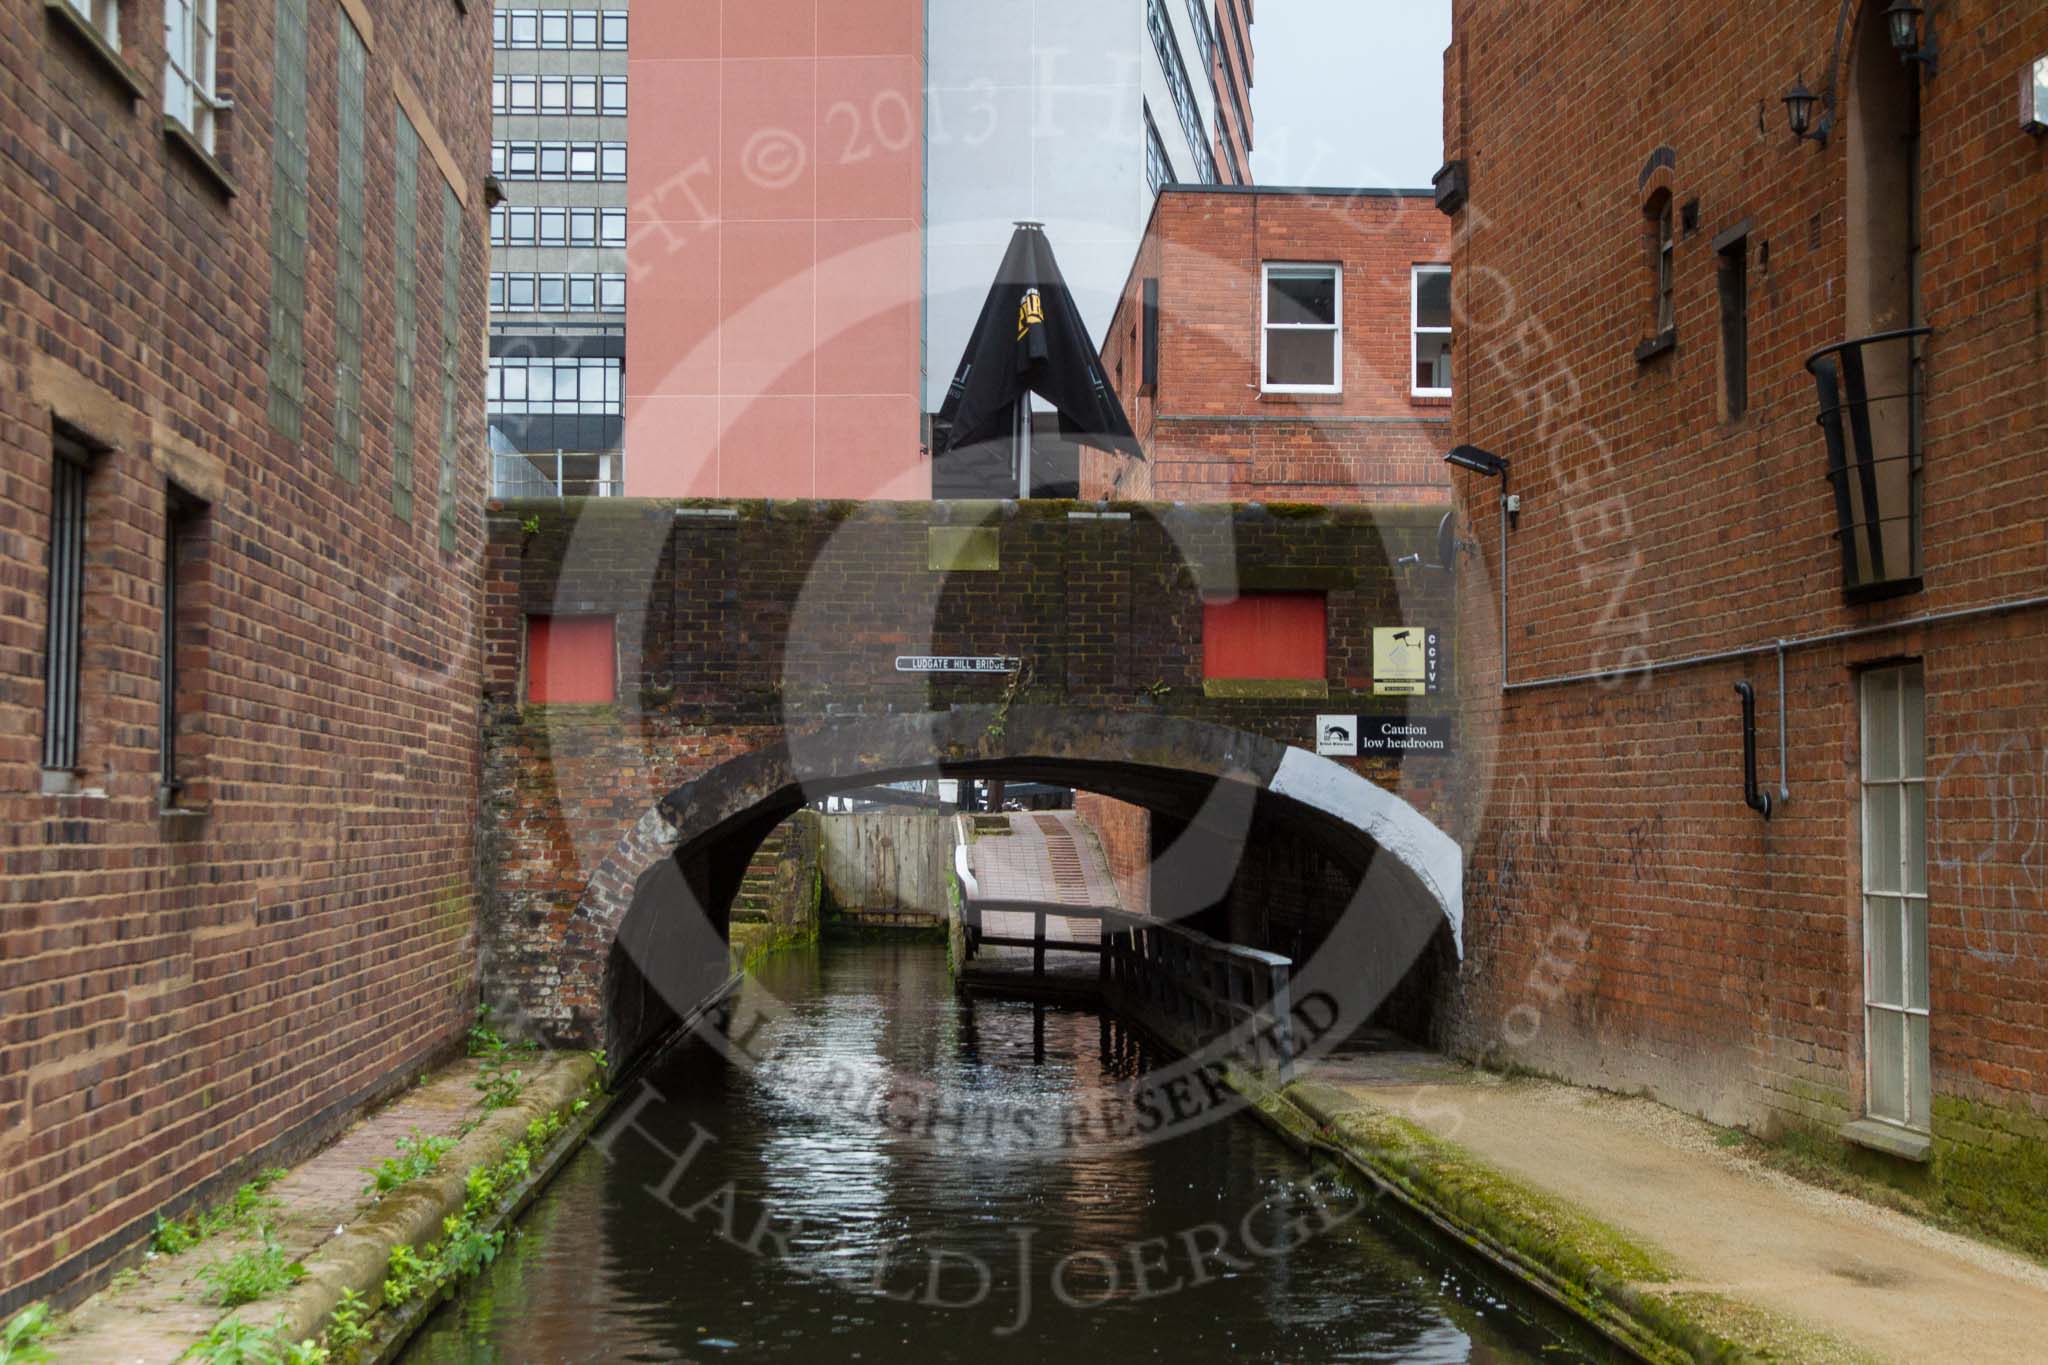 BCN Marathon Challenge 2014: Old and new at the Farmers Bridge Flight, Birmingham & Fazeley Canal, at Ludgate Hill Bridge, where the canal is dwarfed by a modern office block and the BT Tower..
Birmingham Canal Navigation,


United Kingdom,
on 23 May 2014 at 14:57, image #34